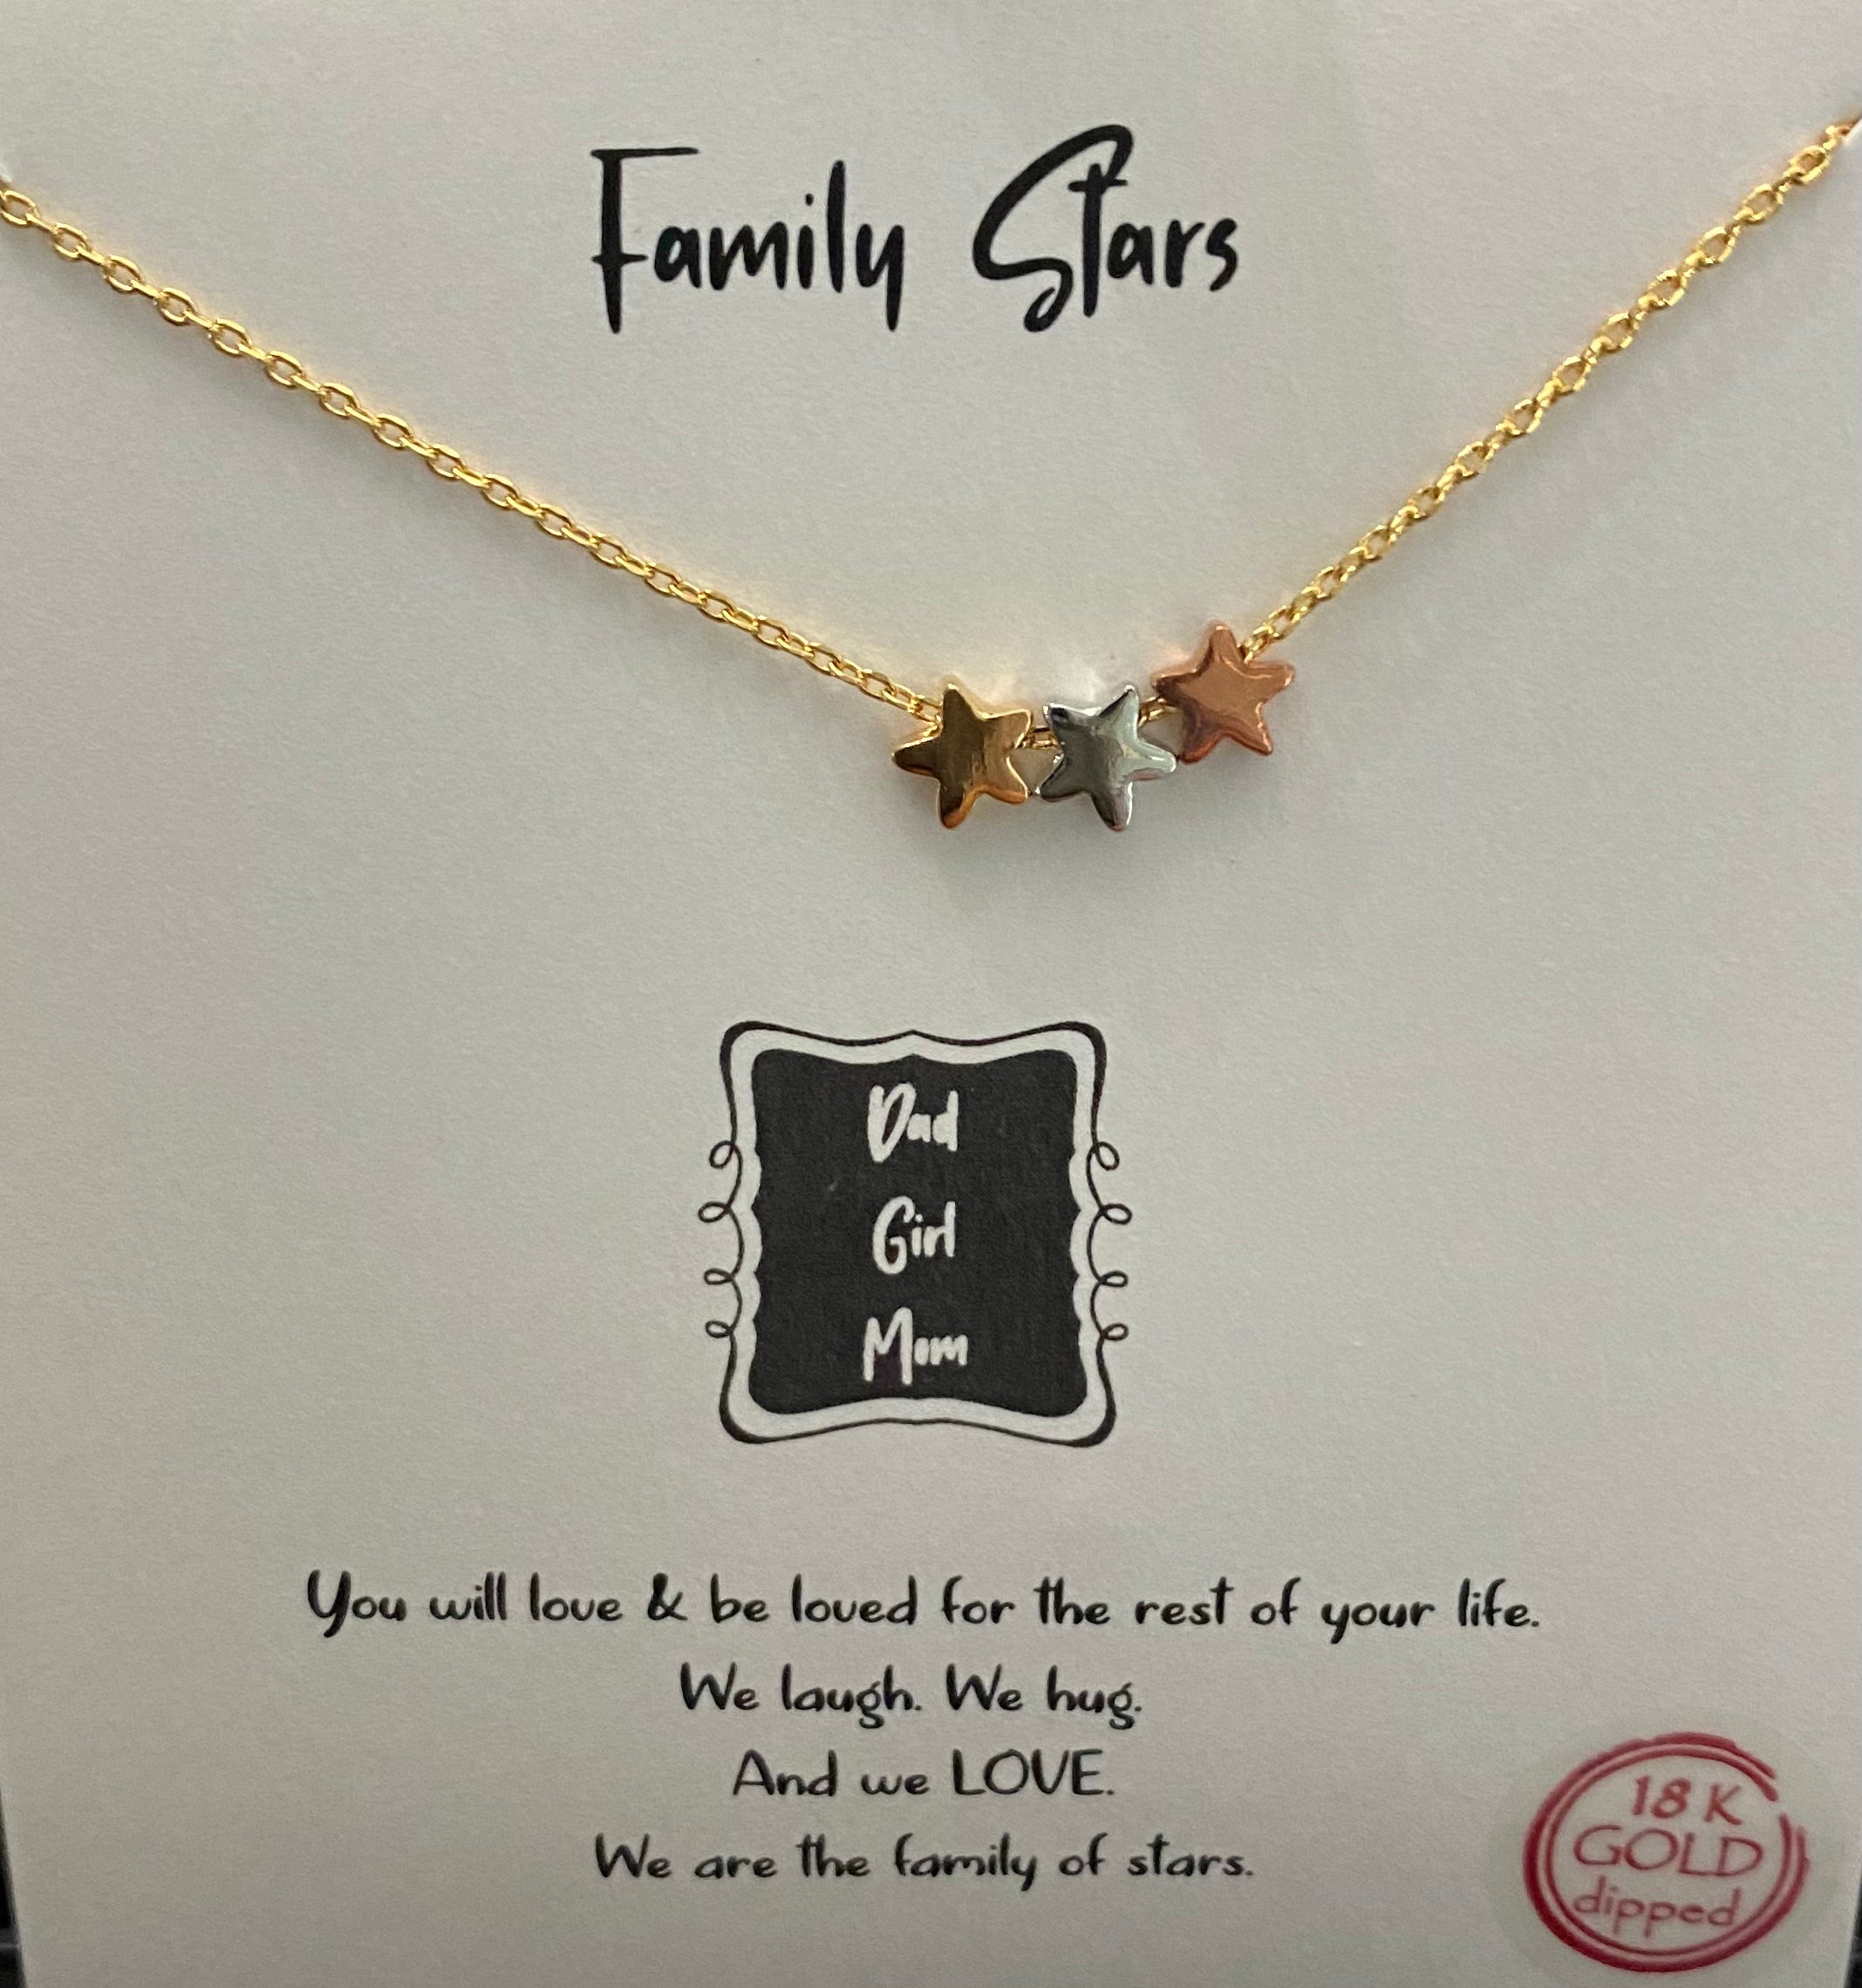 Family Stars statement necklace